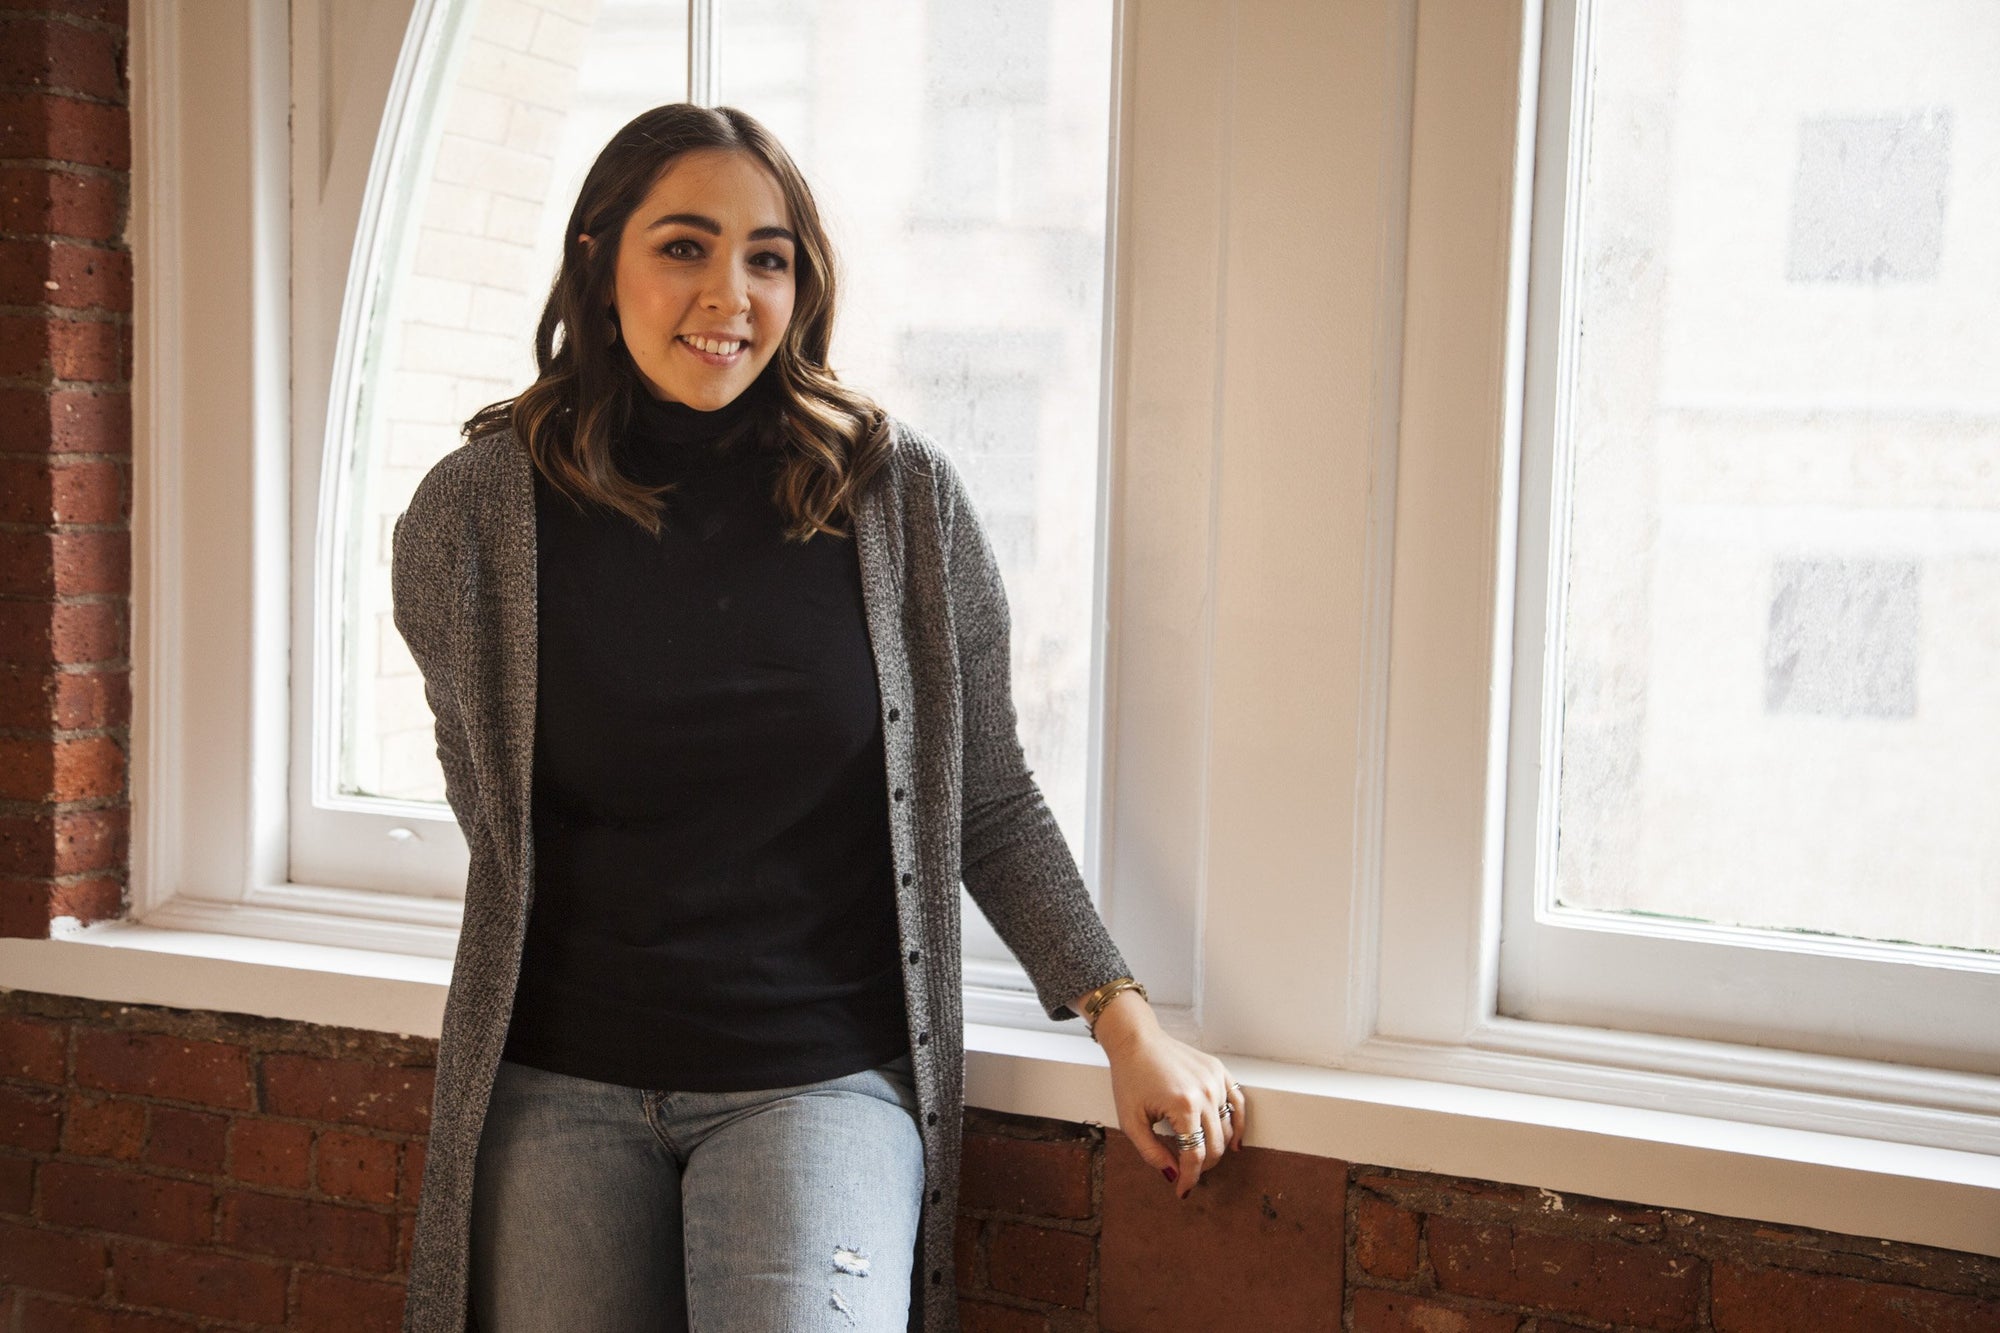 Q&A with Nicole Giordano of StartUp FASHION